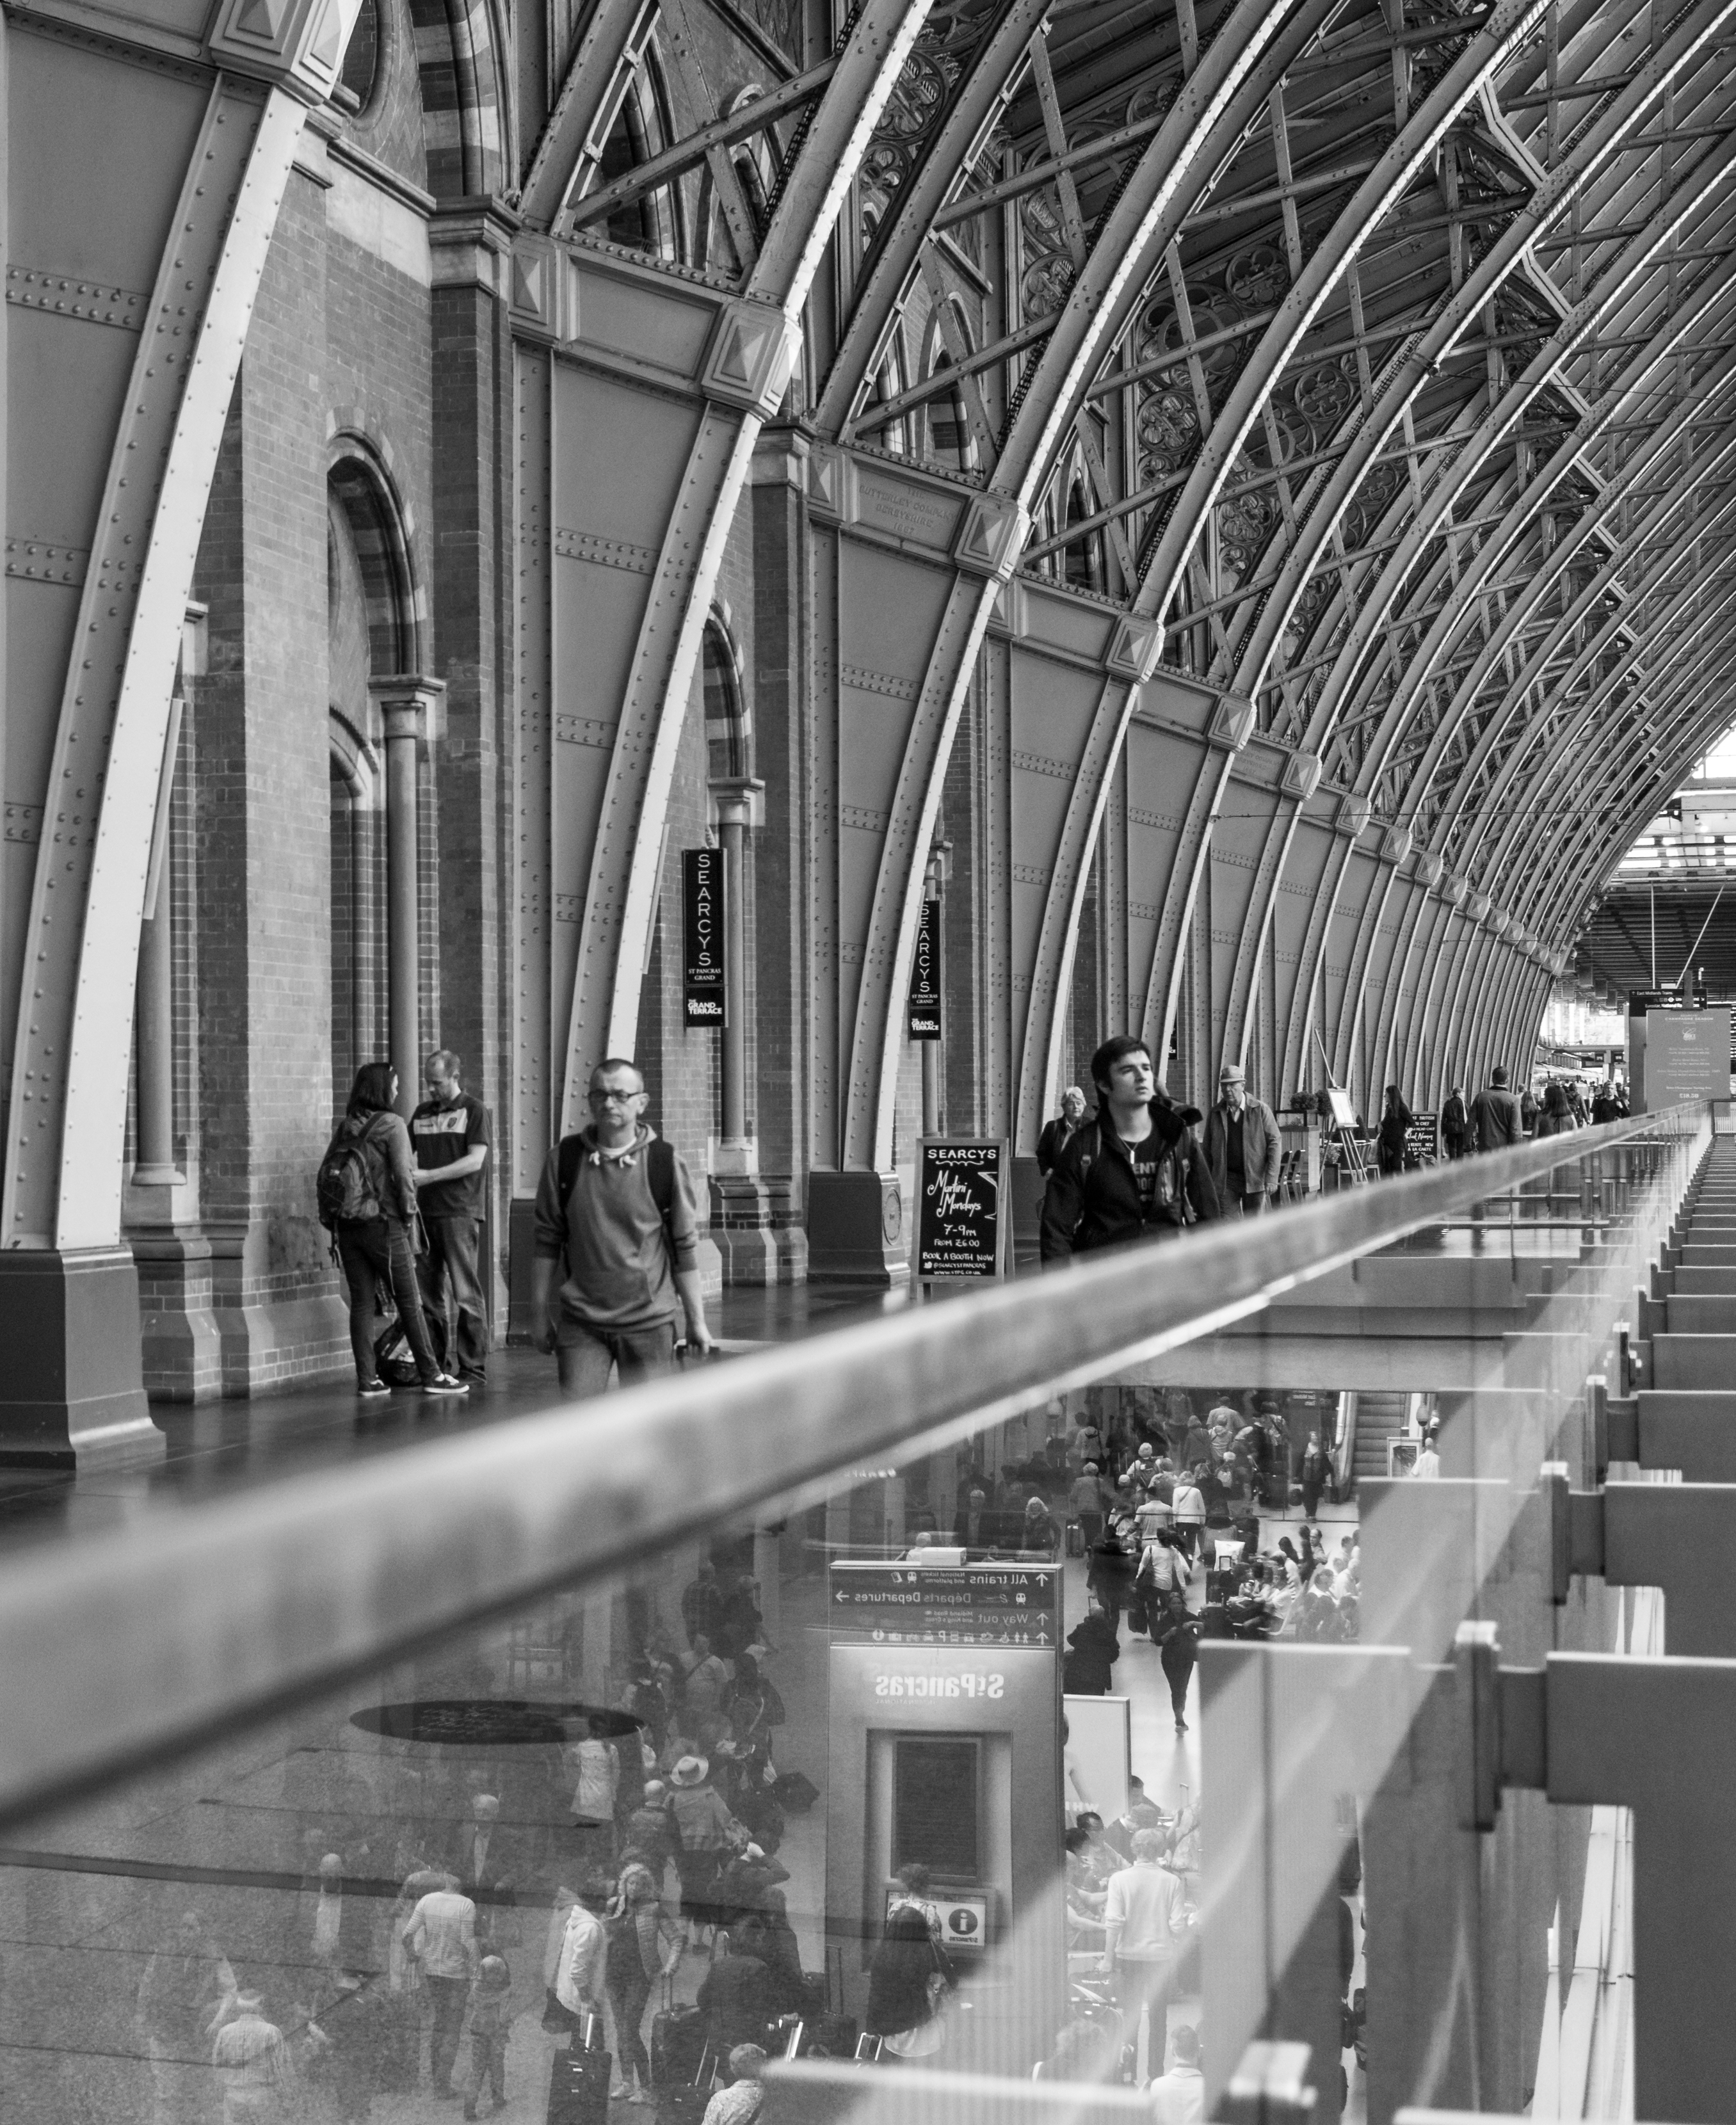 Reflections at St Pancras Railway Station